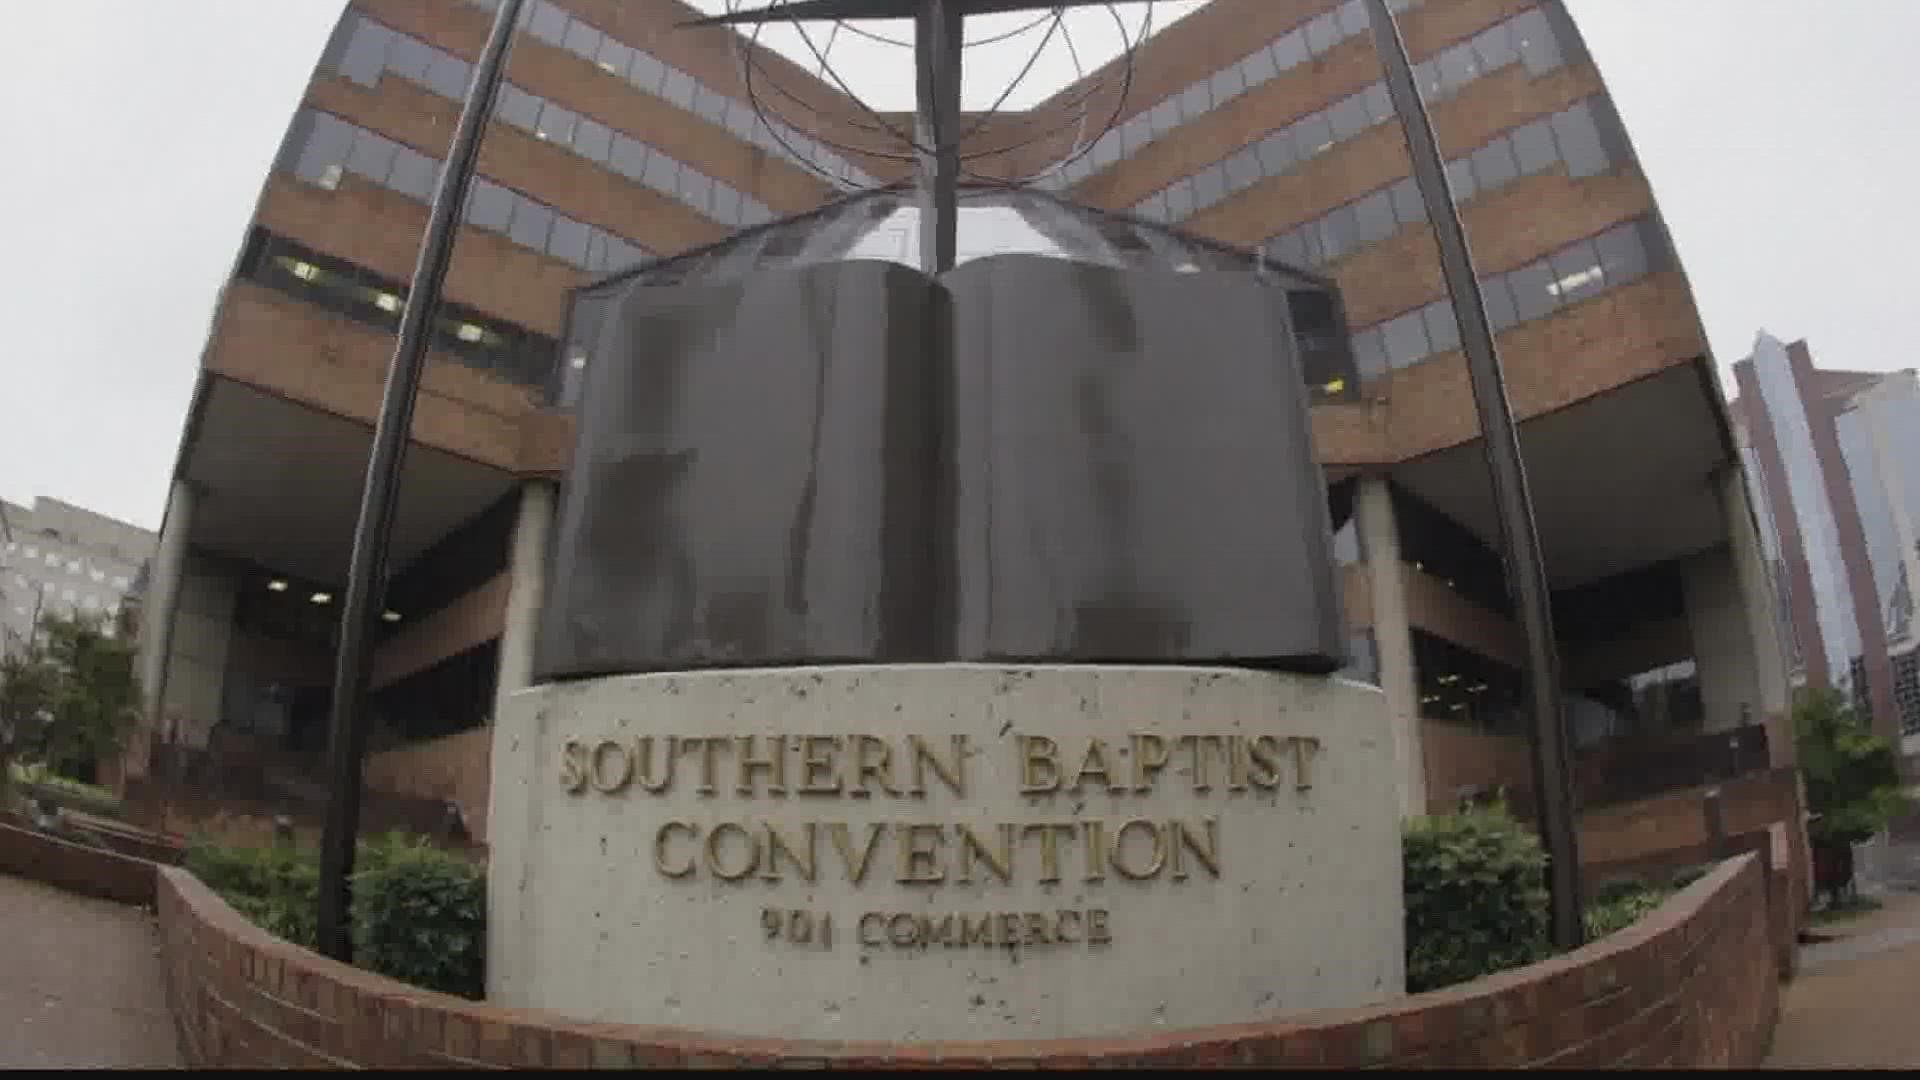 Earlier this year the SBC released a previously secrete list of hundreds of pastors and church-affiliated personnel accused of abuse